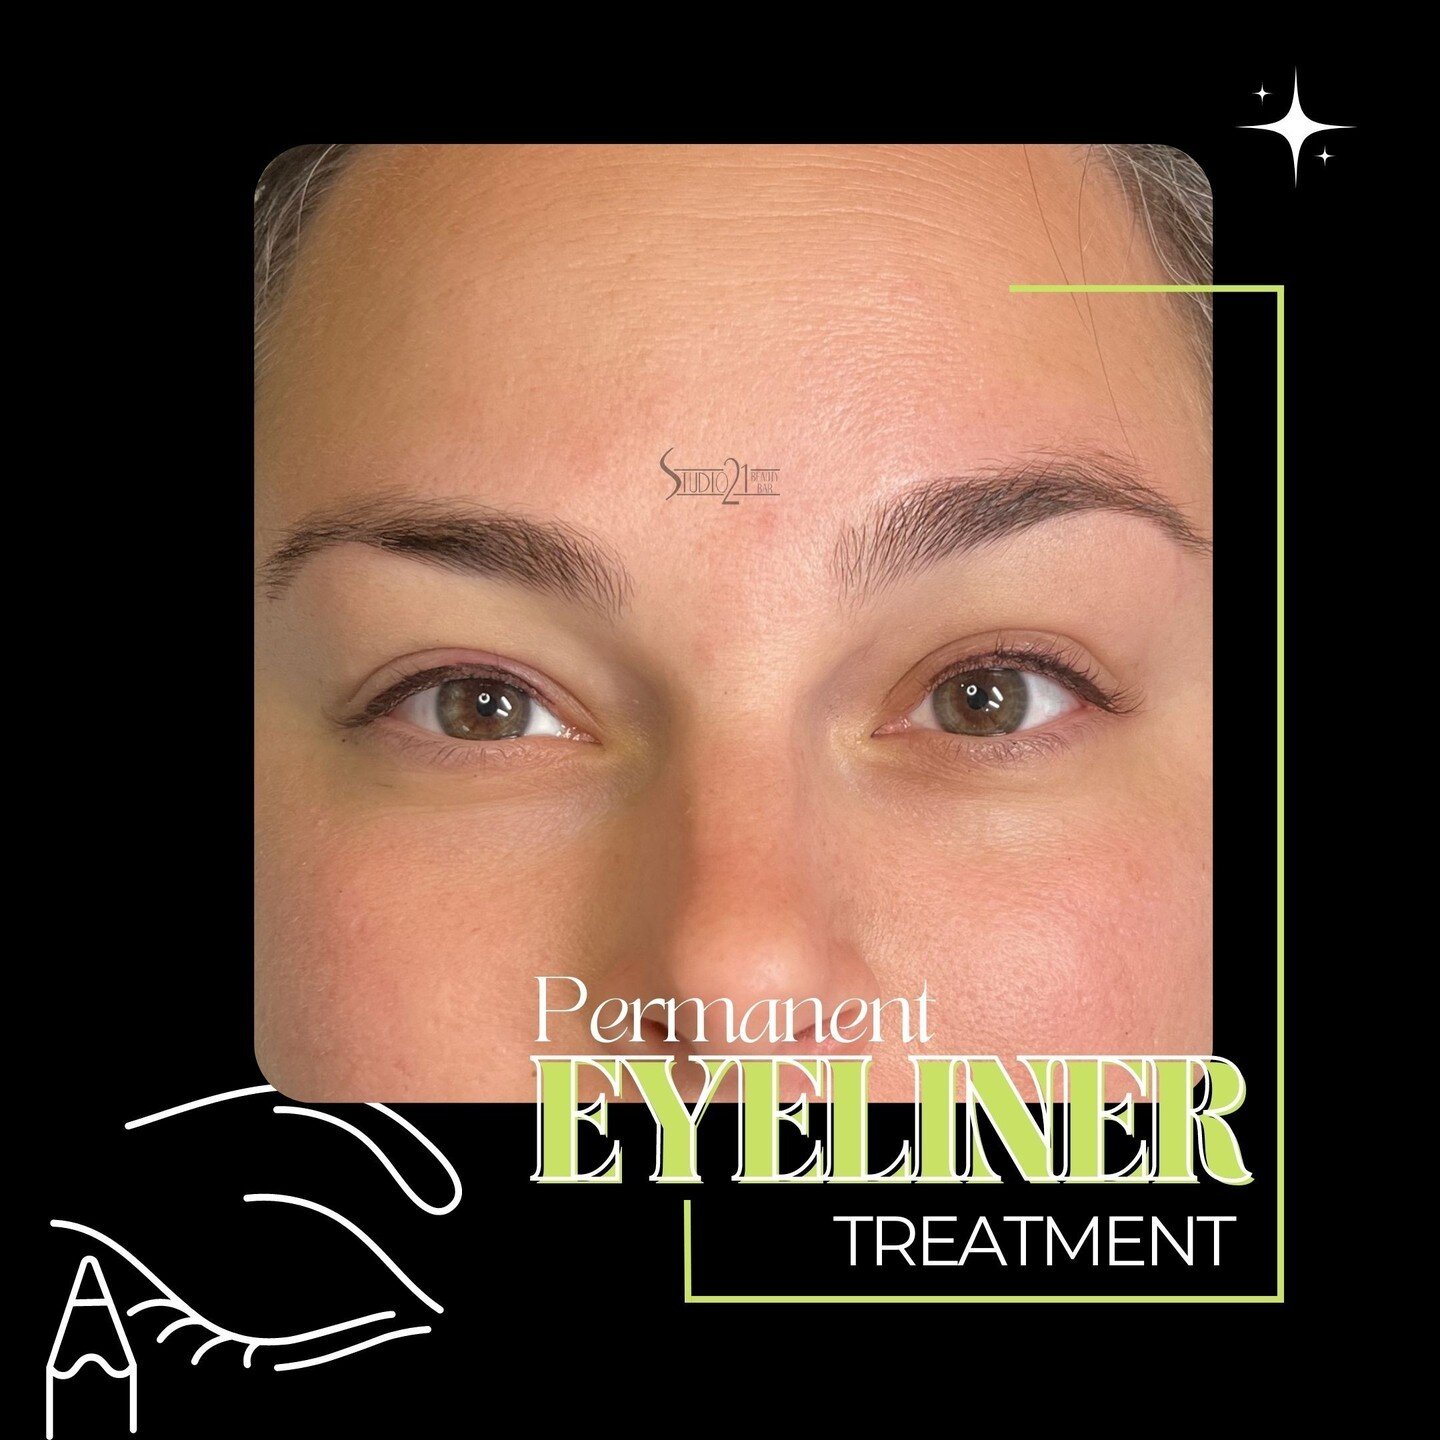 Check out this beauty with her fresh Eyeliner! Choose from an array of styles and give your eyes consistent definition with no effort. Visit the link in bio to schedule your appointment! 

#Studio21BeautyBar #BrowandBeauty